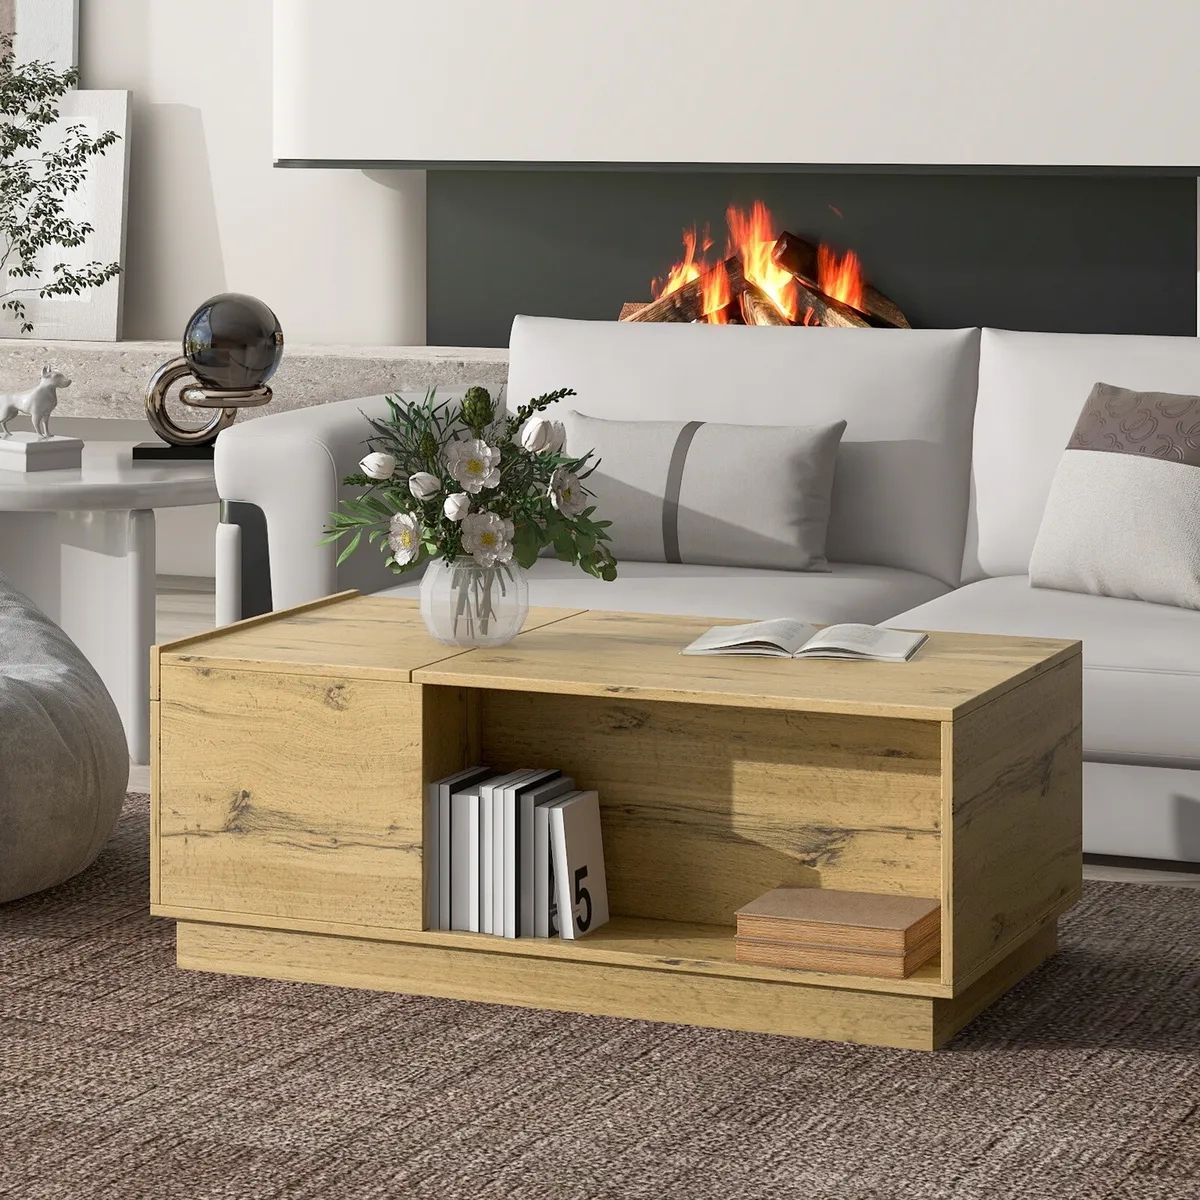 Wood Lift Top Coffee Table With Hidden Compartment & Storage Shelf, Side  Drawer | Ebay In Coffee Tables With Hidden Compartments (View 8 of 15)